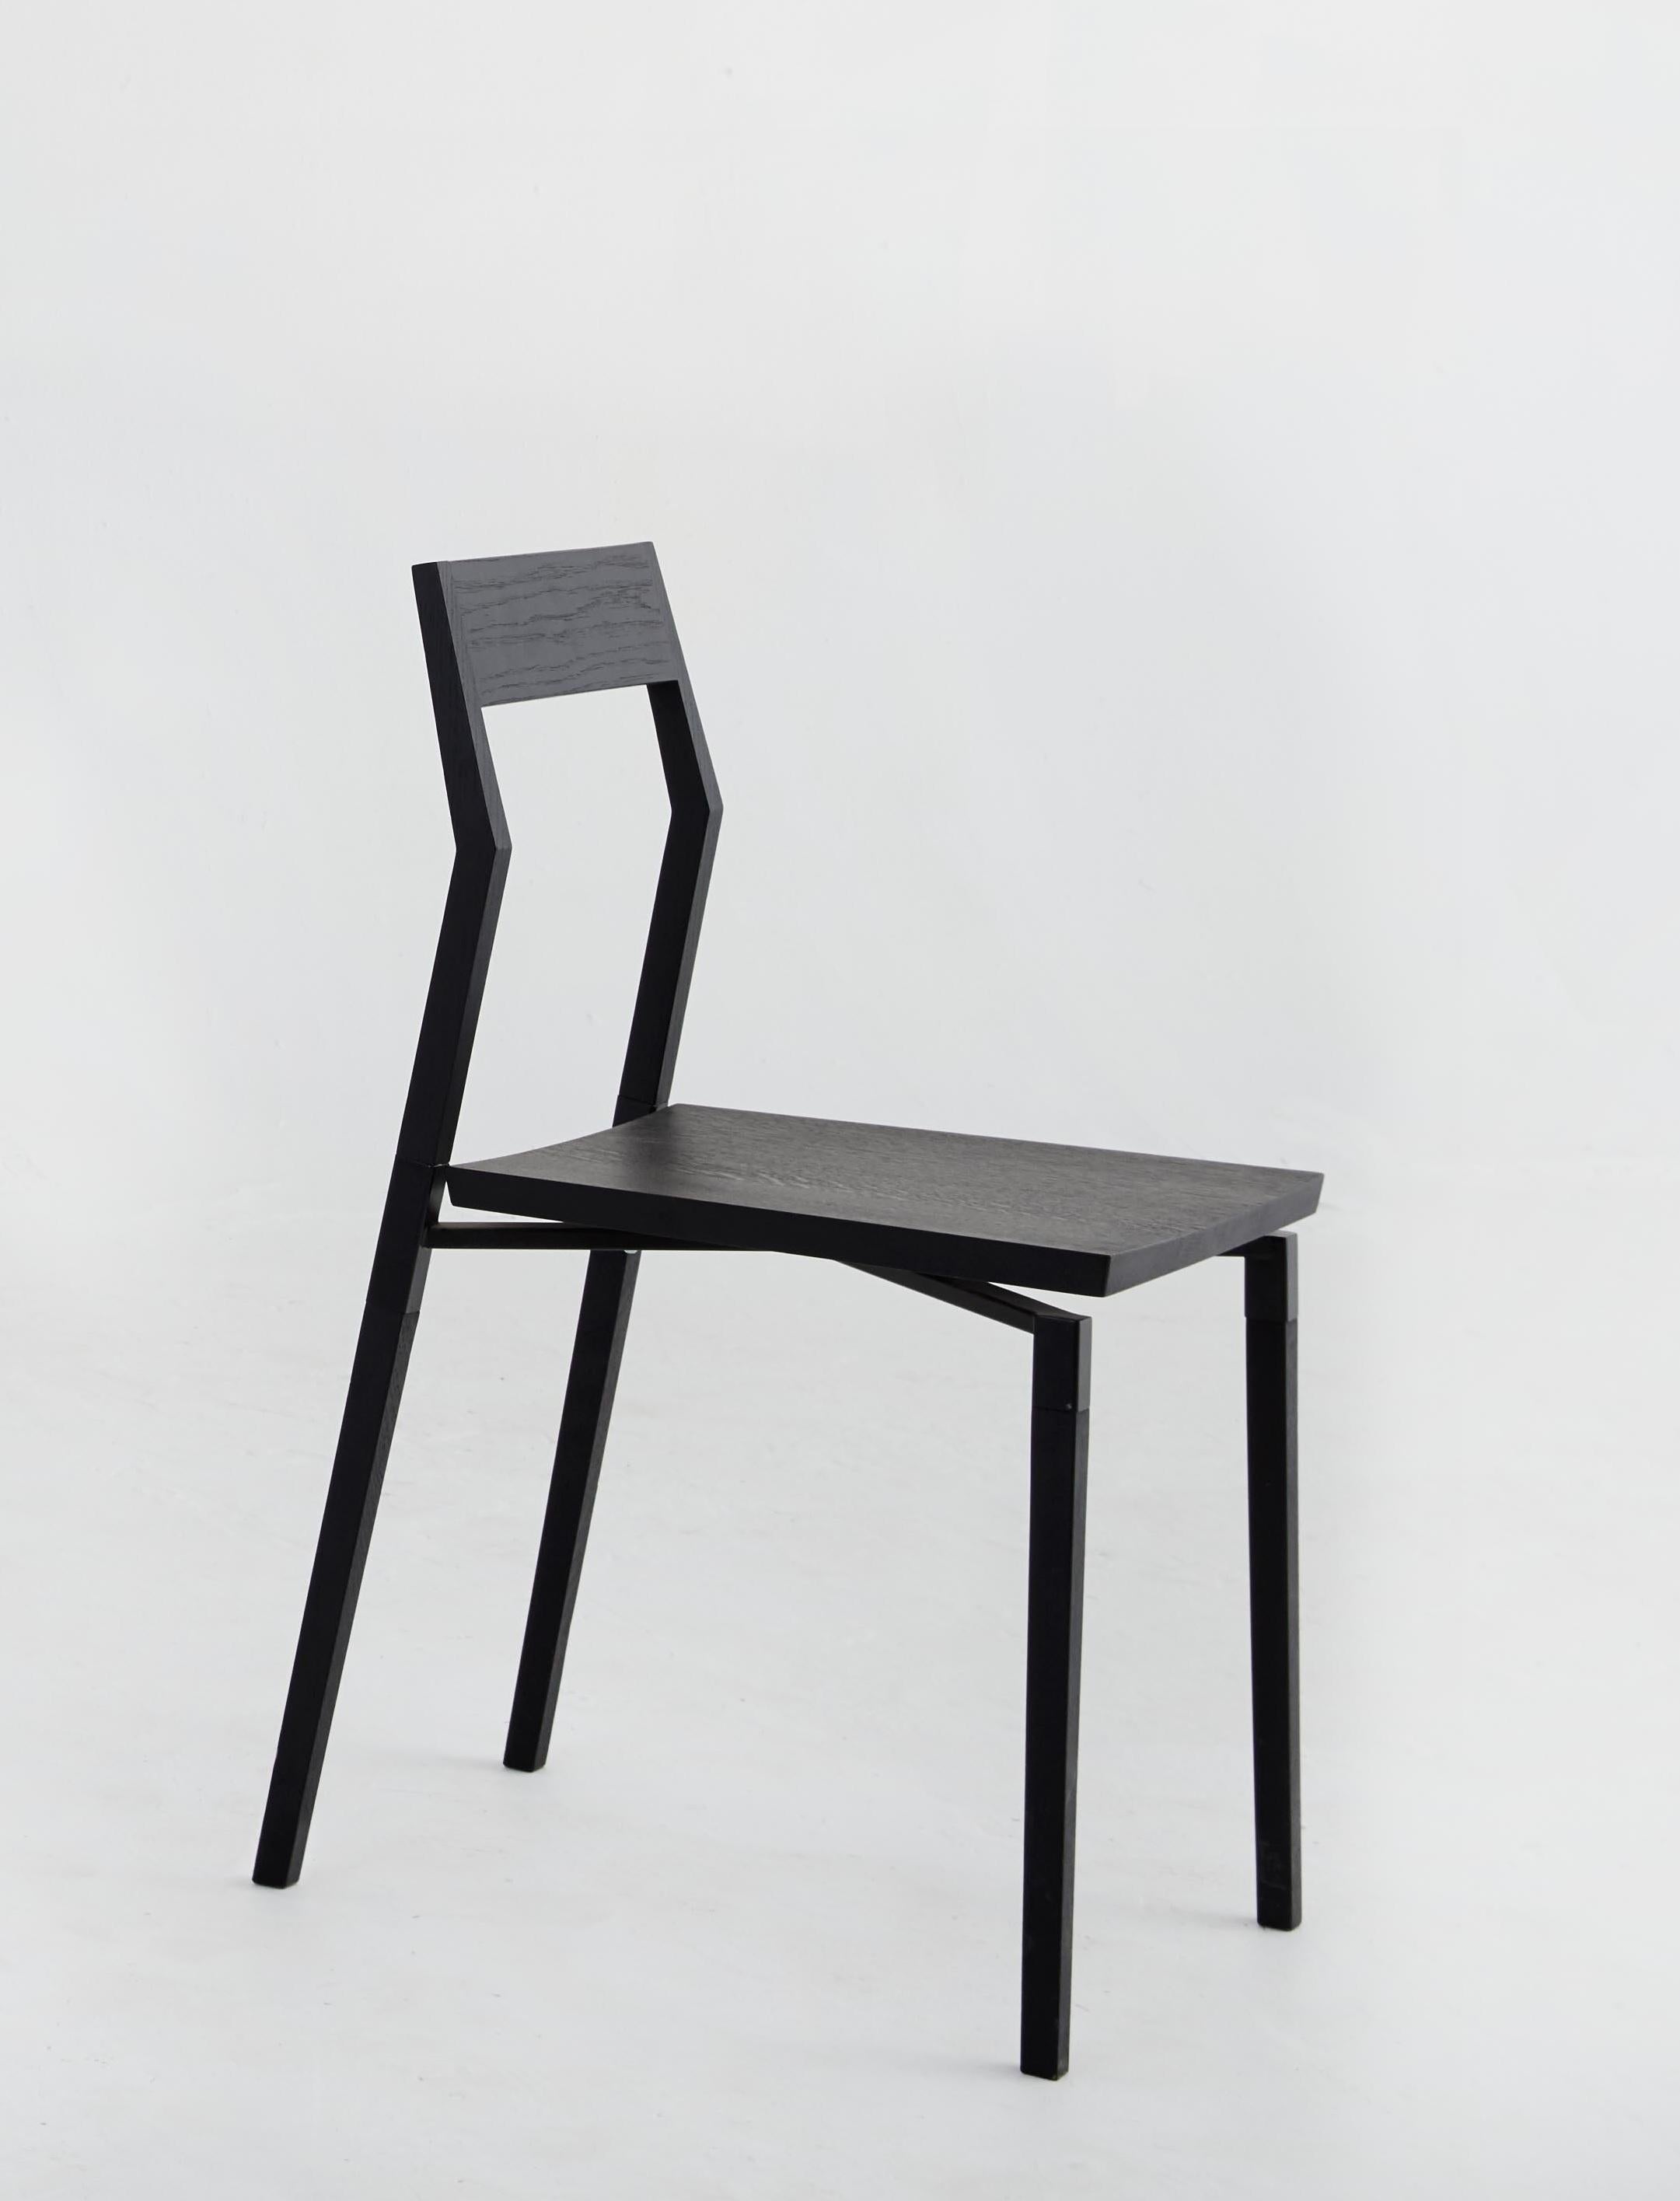 Walnut parkdale dining chair by Hollis & Morris
Dimensions: 18.5